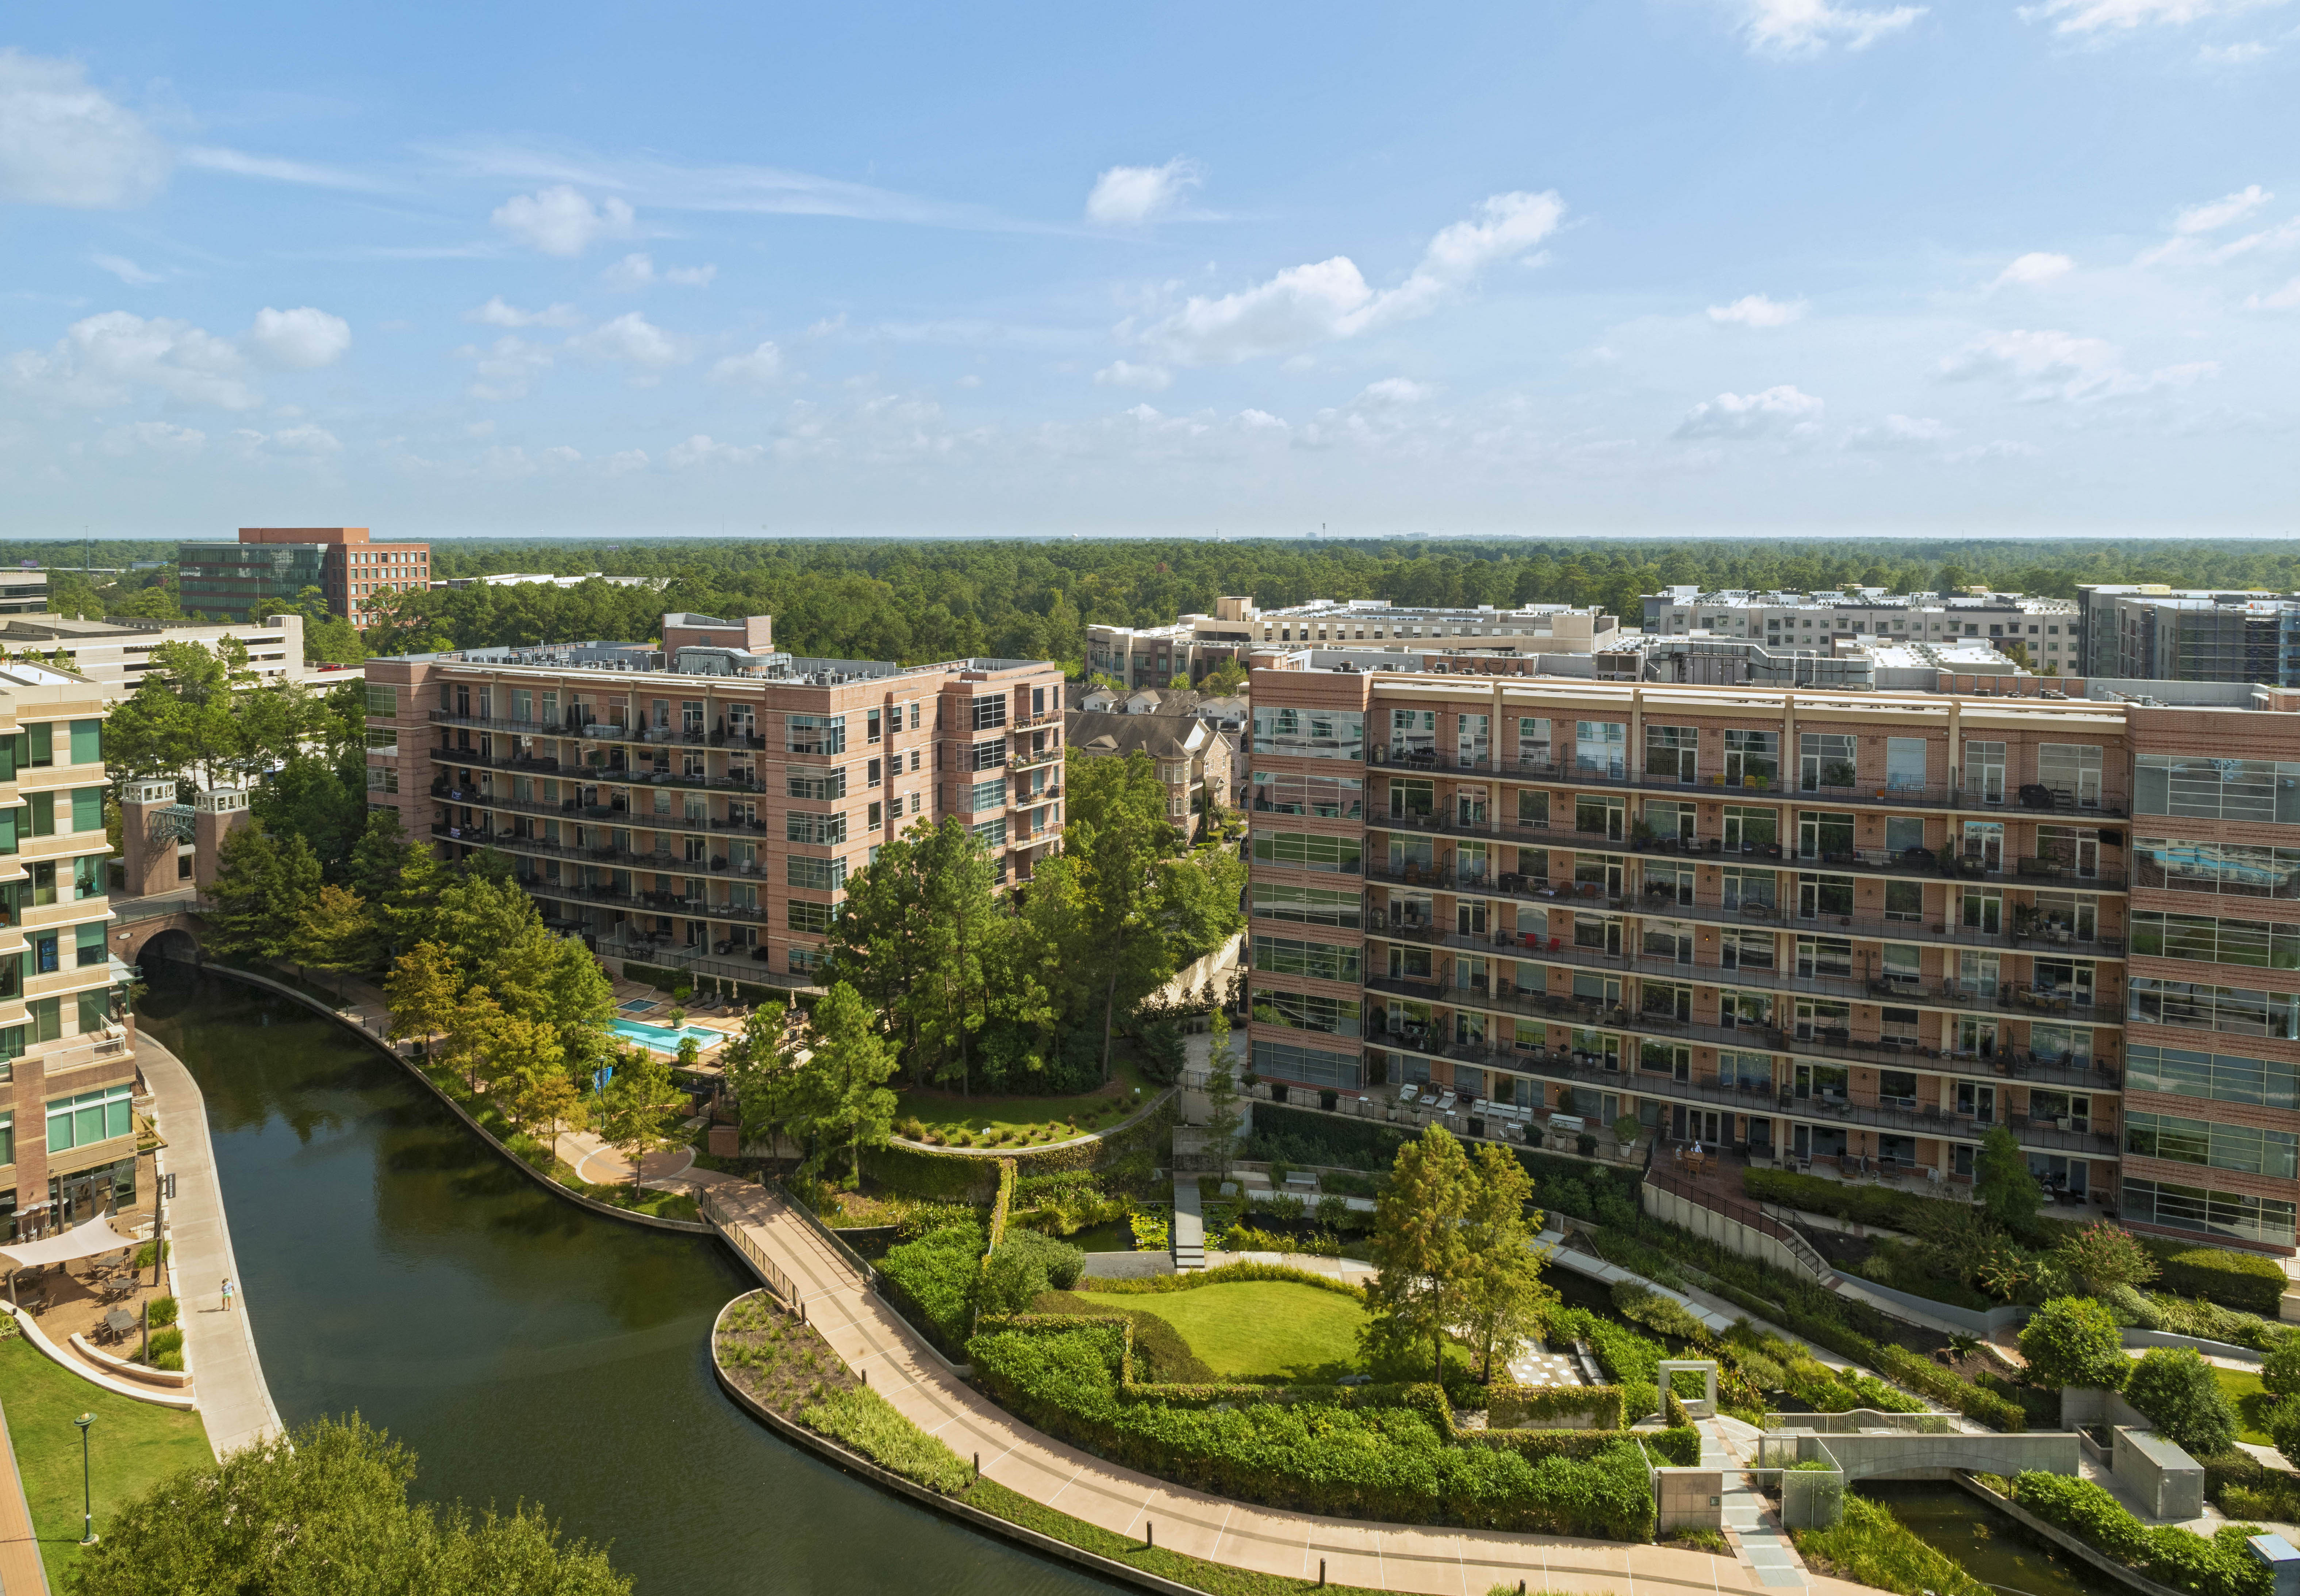 View of the Woodlands Waterway canal and apartment buildings from a guest room.